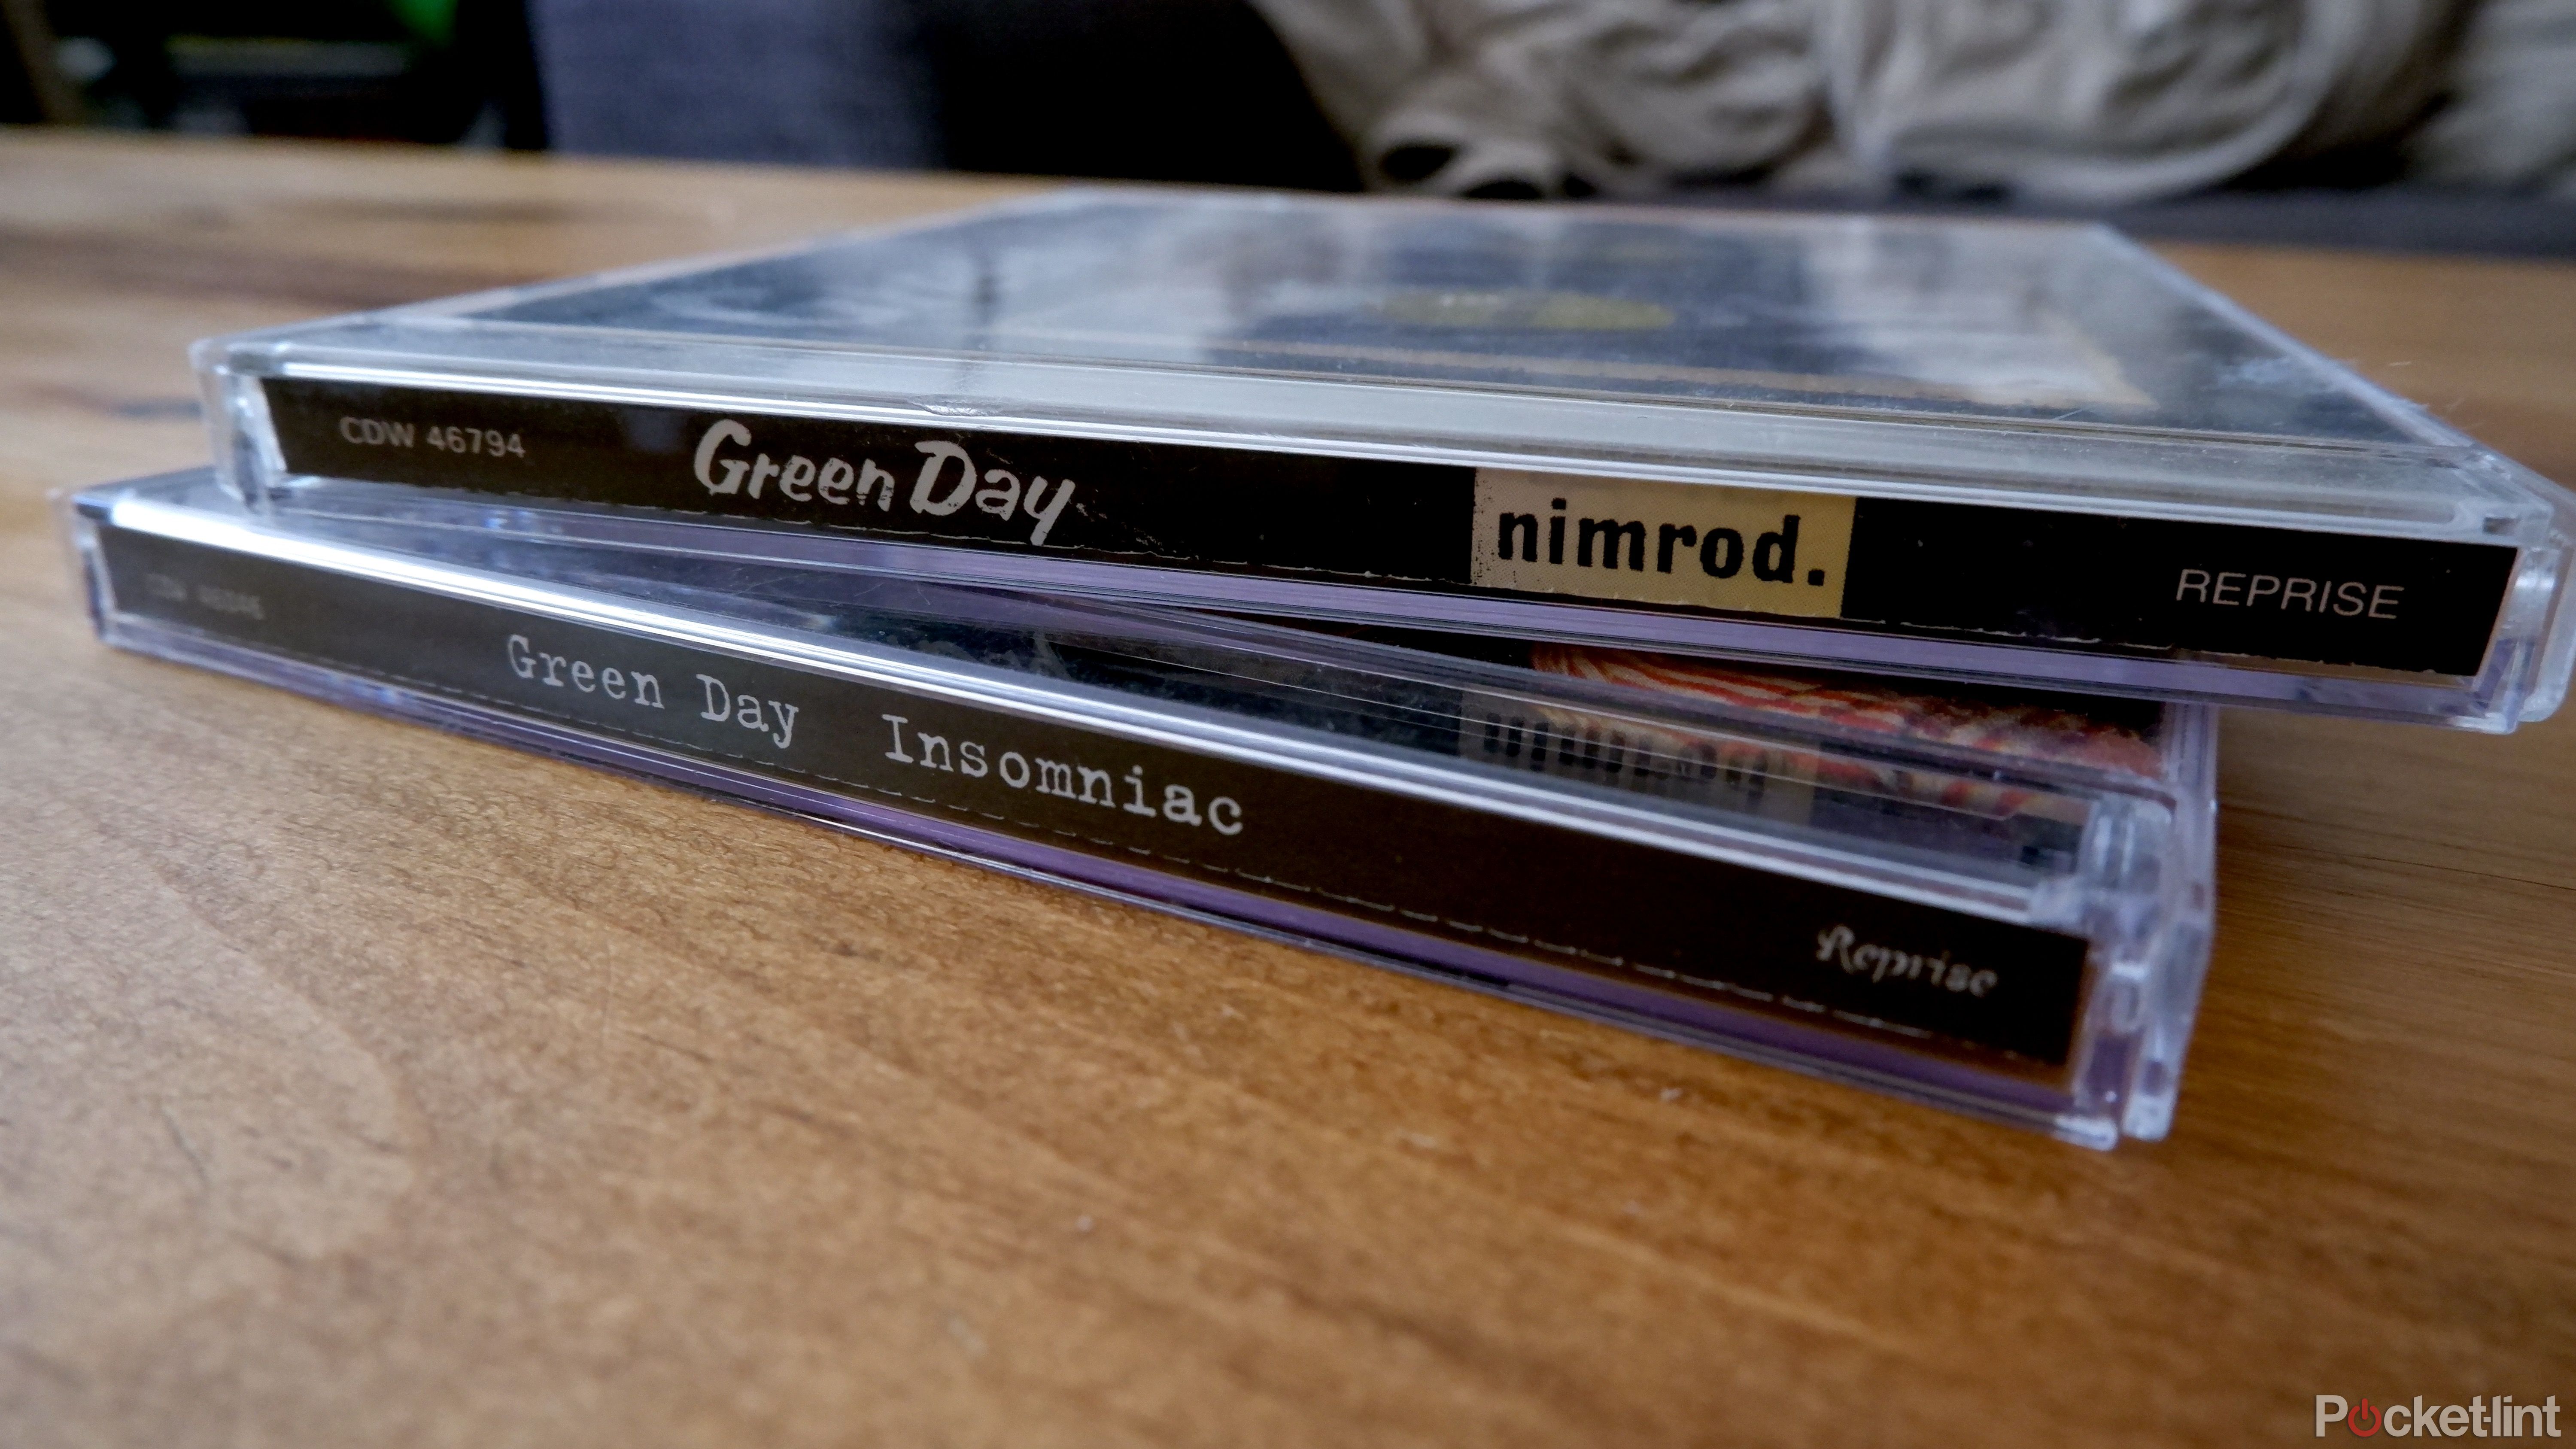 Two Green Day CD cases stacked upon one another on a wooden coffee table.